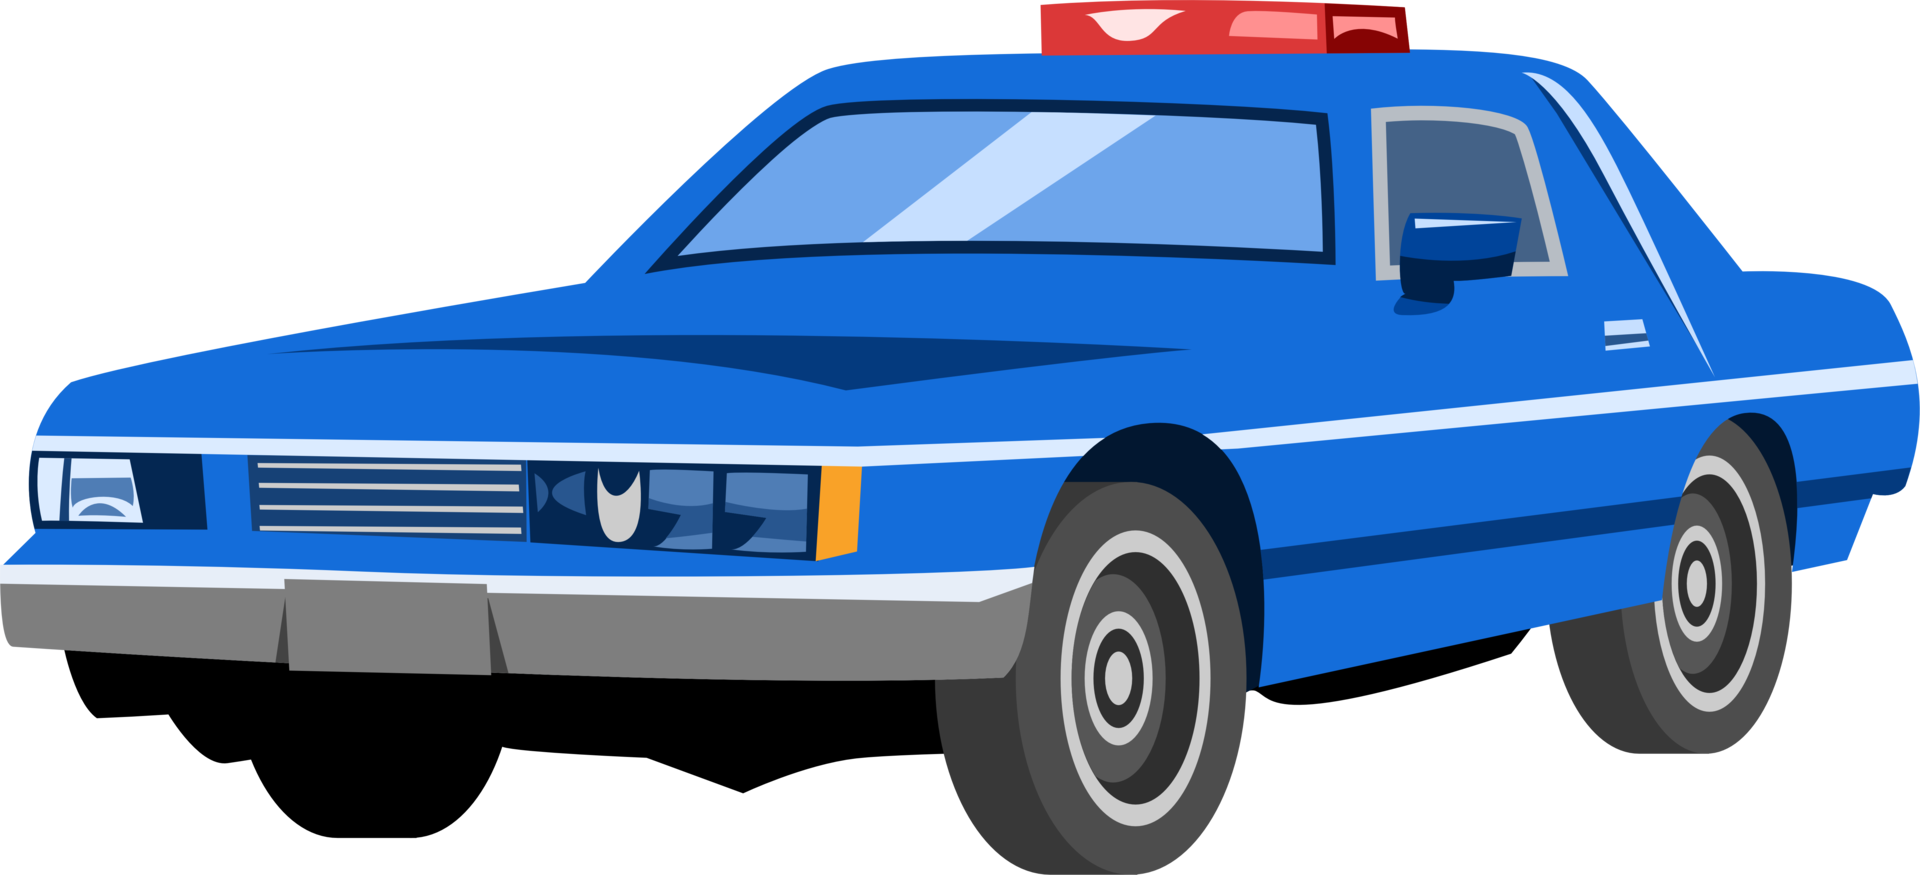 Police car png graphic clipart design